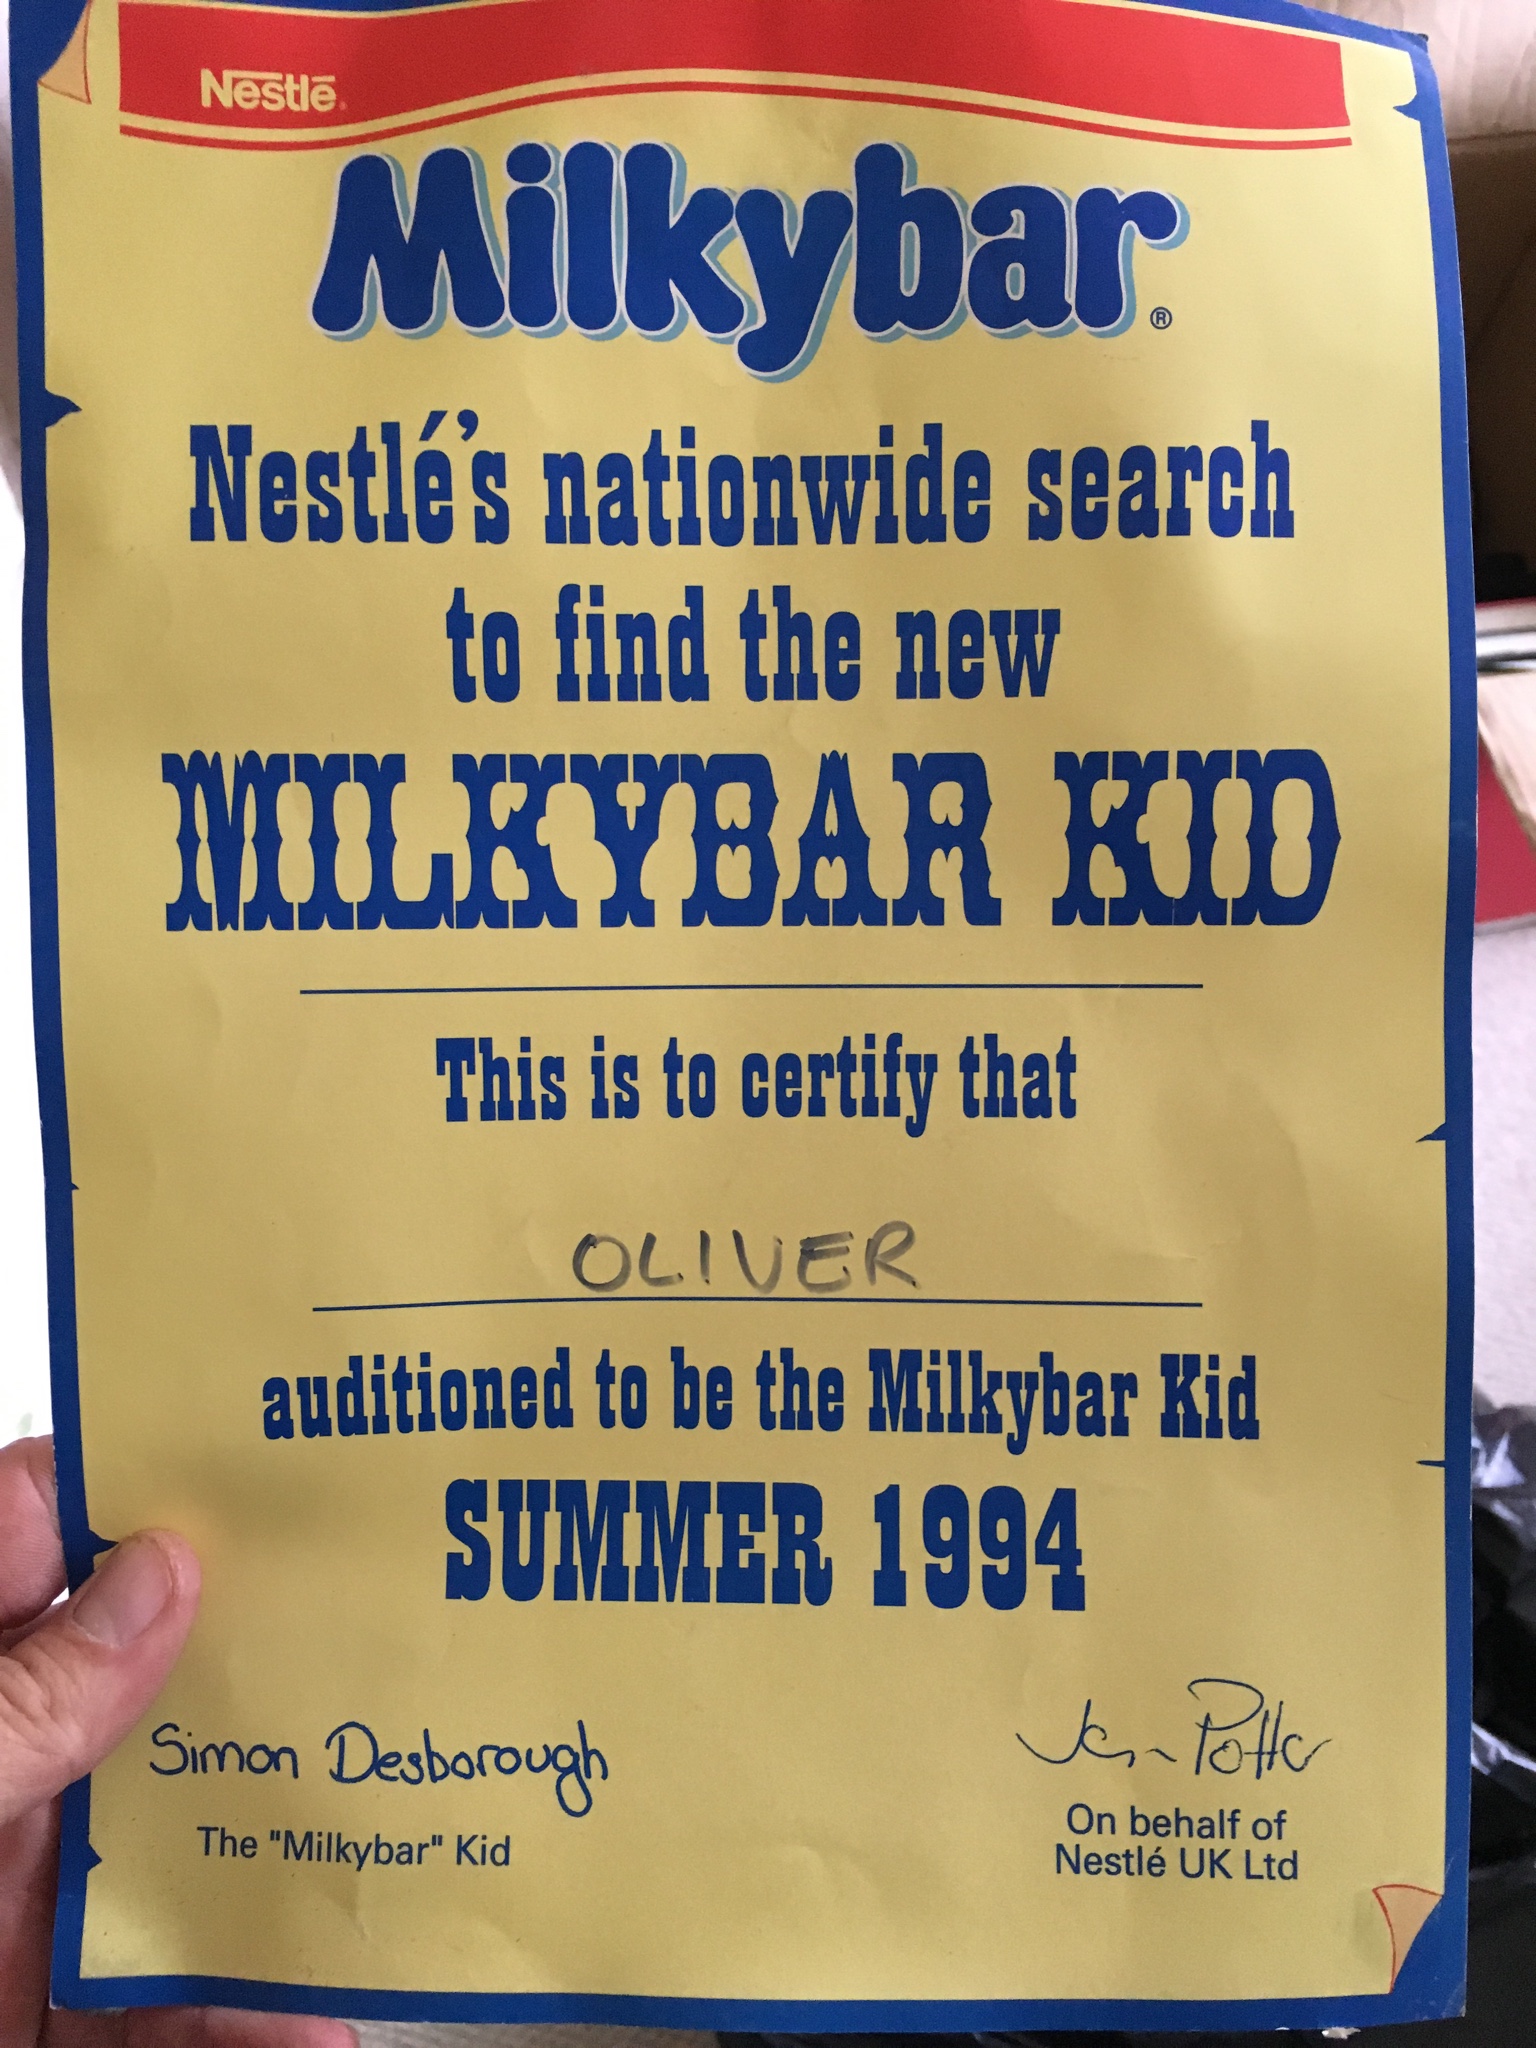  Ollie Peart's audition certificate to be the Milkybar Kid 